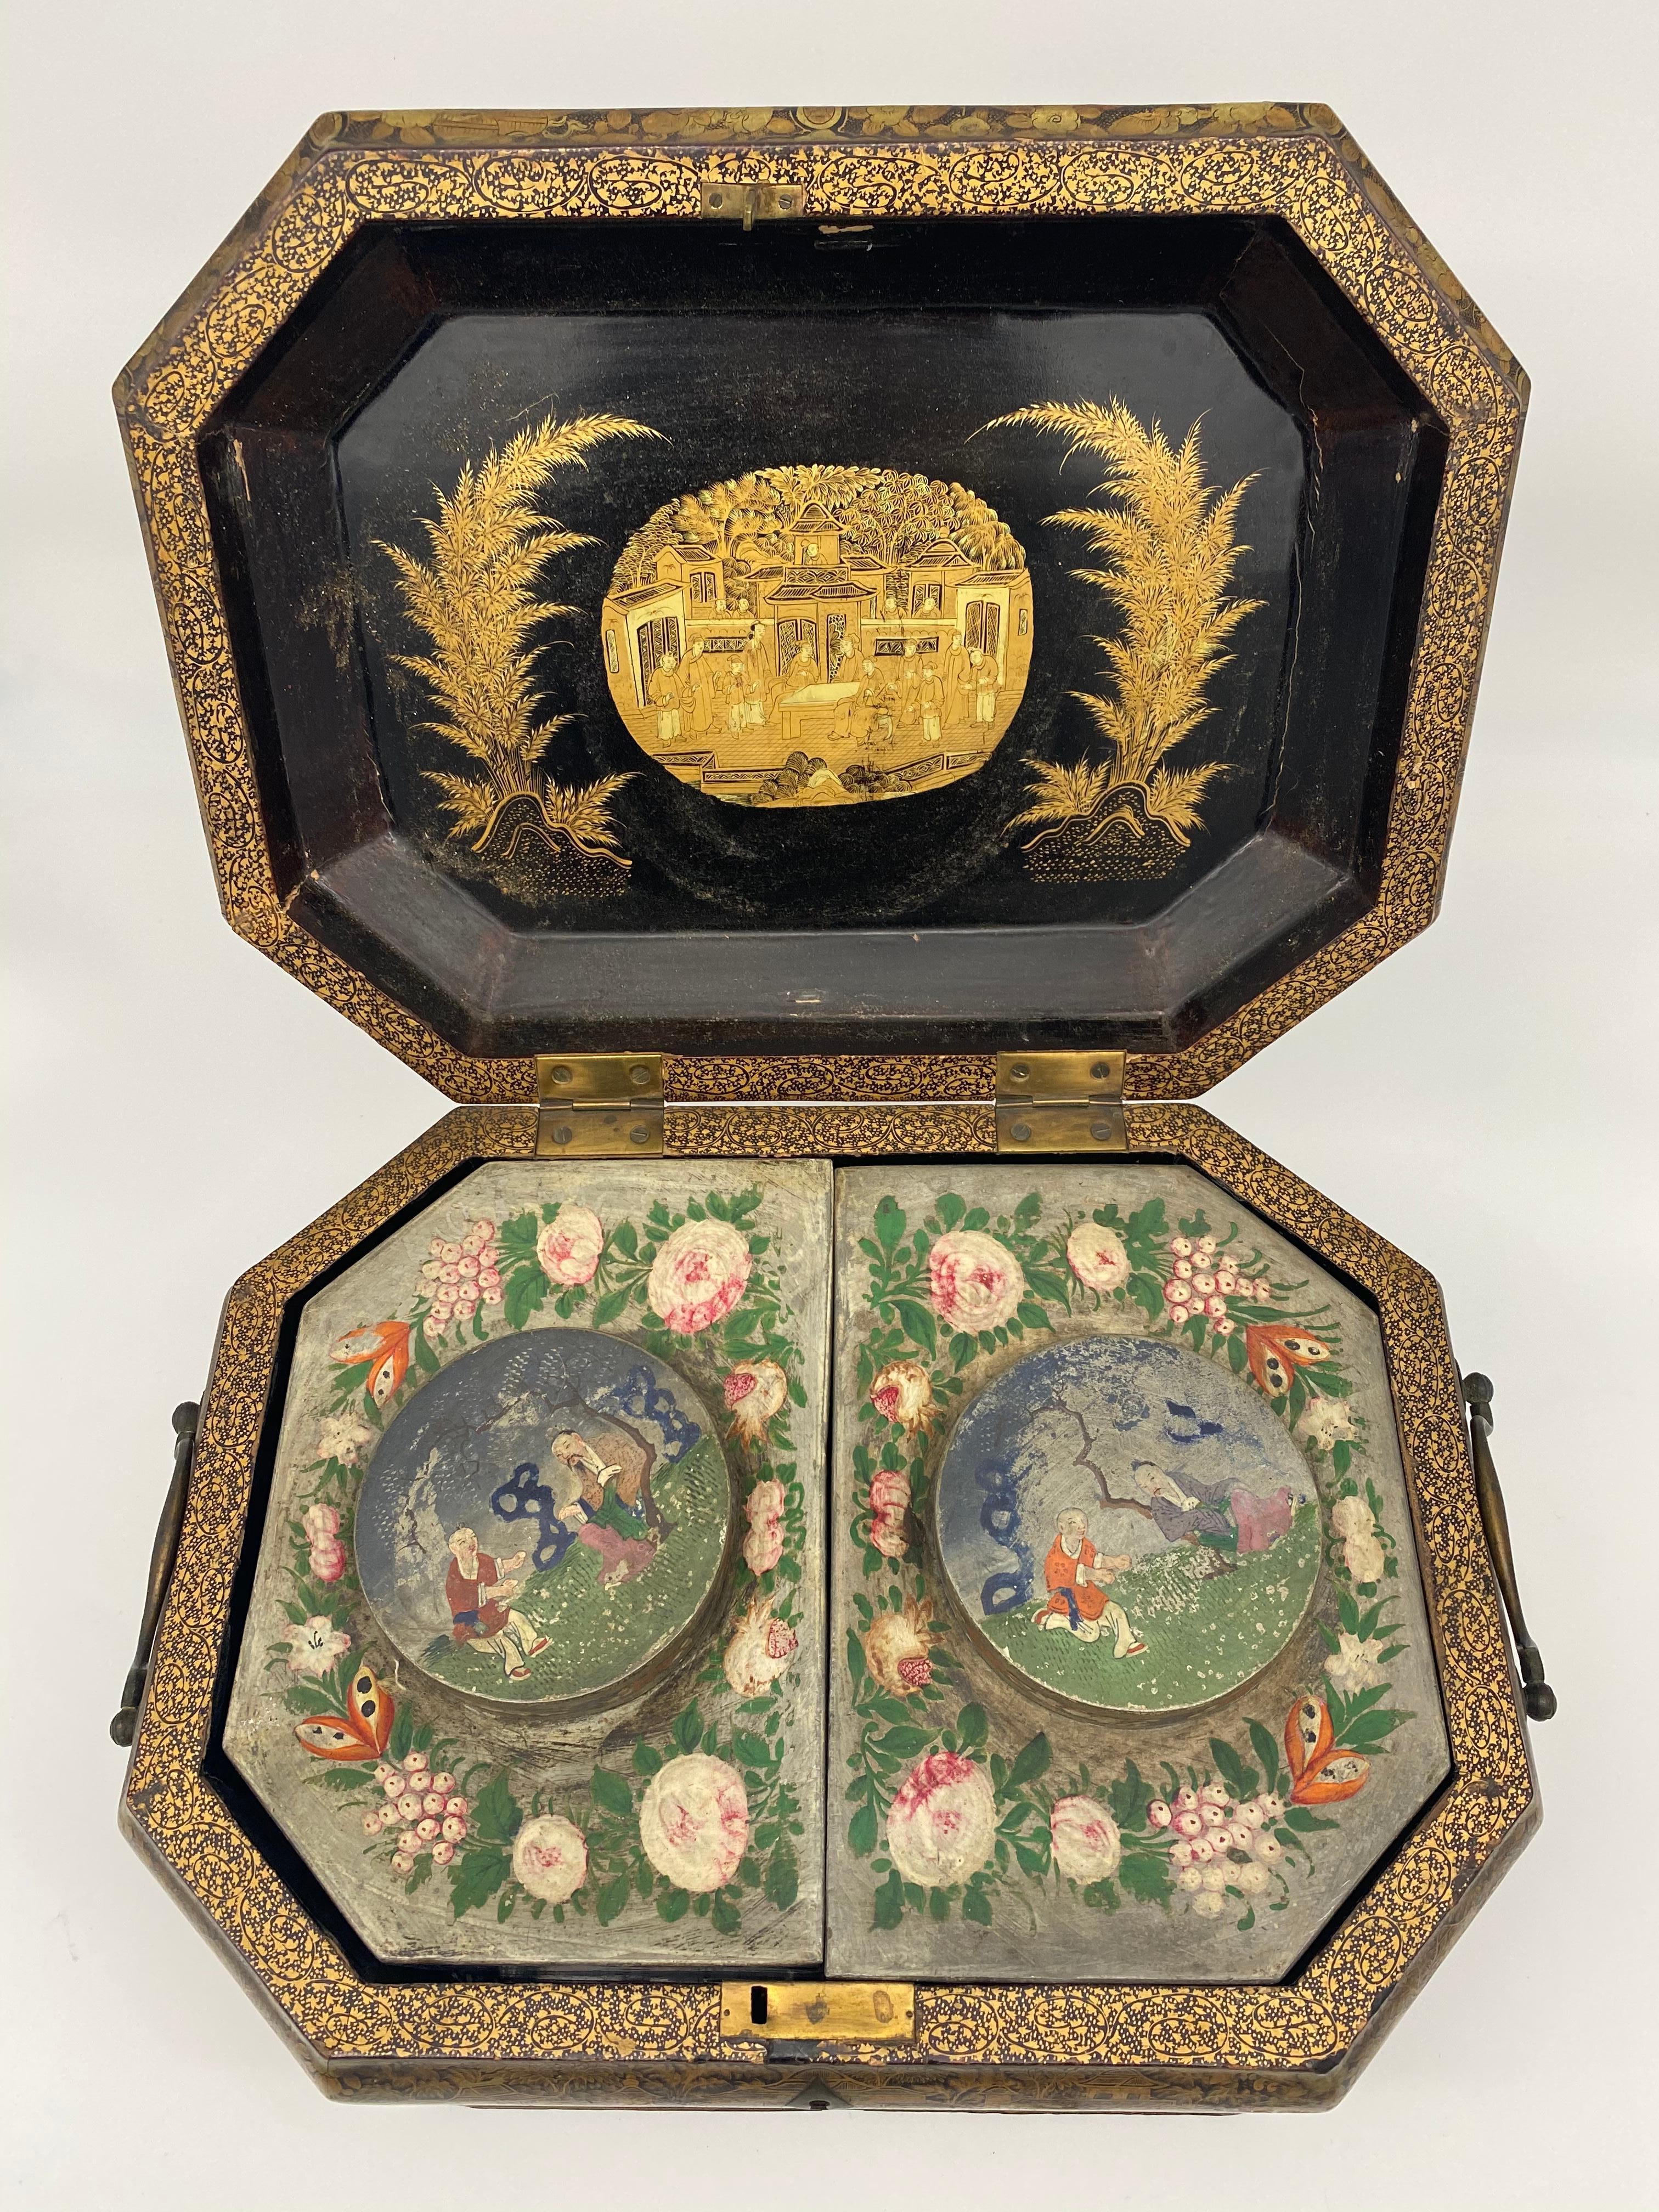 Large 19th century antique Chinese export gilt lacquer tea caddy with original painted tin inserts. Black lacquer with gilt design of foliage, figurative scenes, etc. Octagonal shape with original heavy zinc or tin inserts, each having their